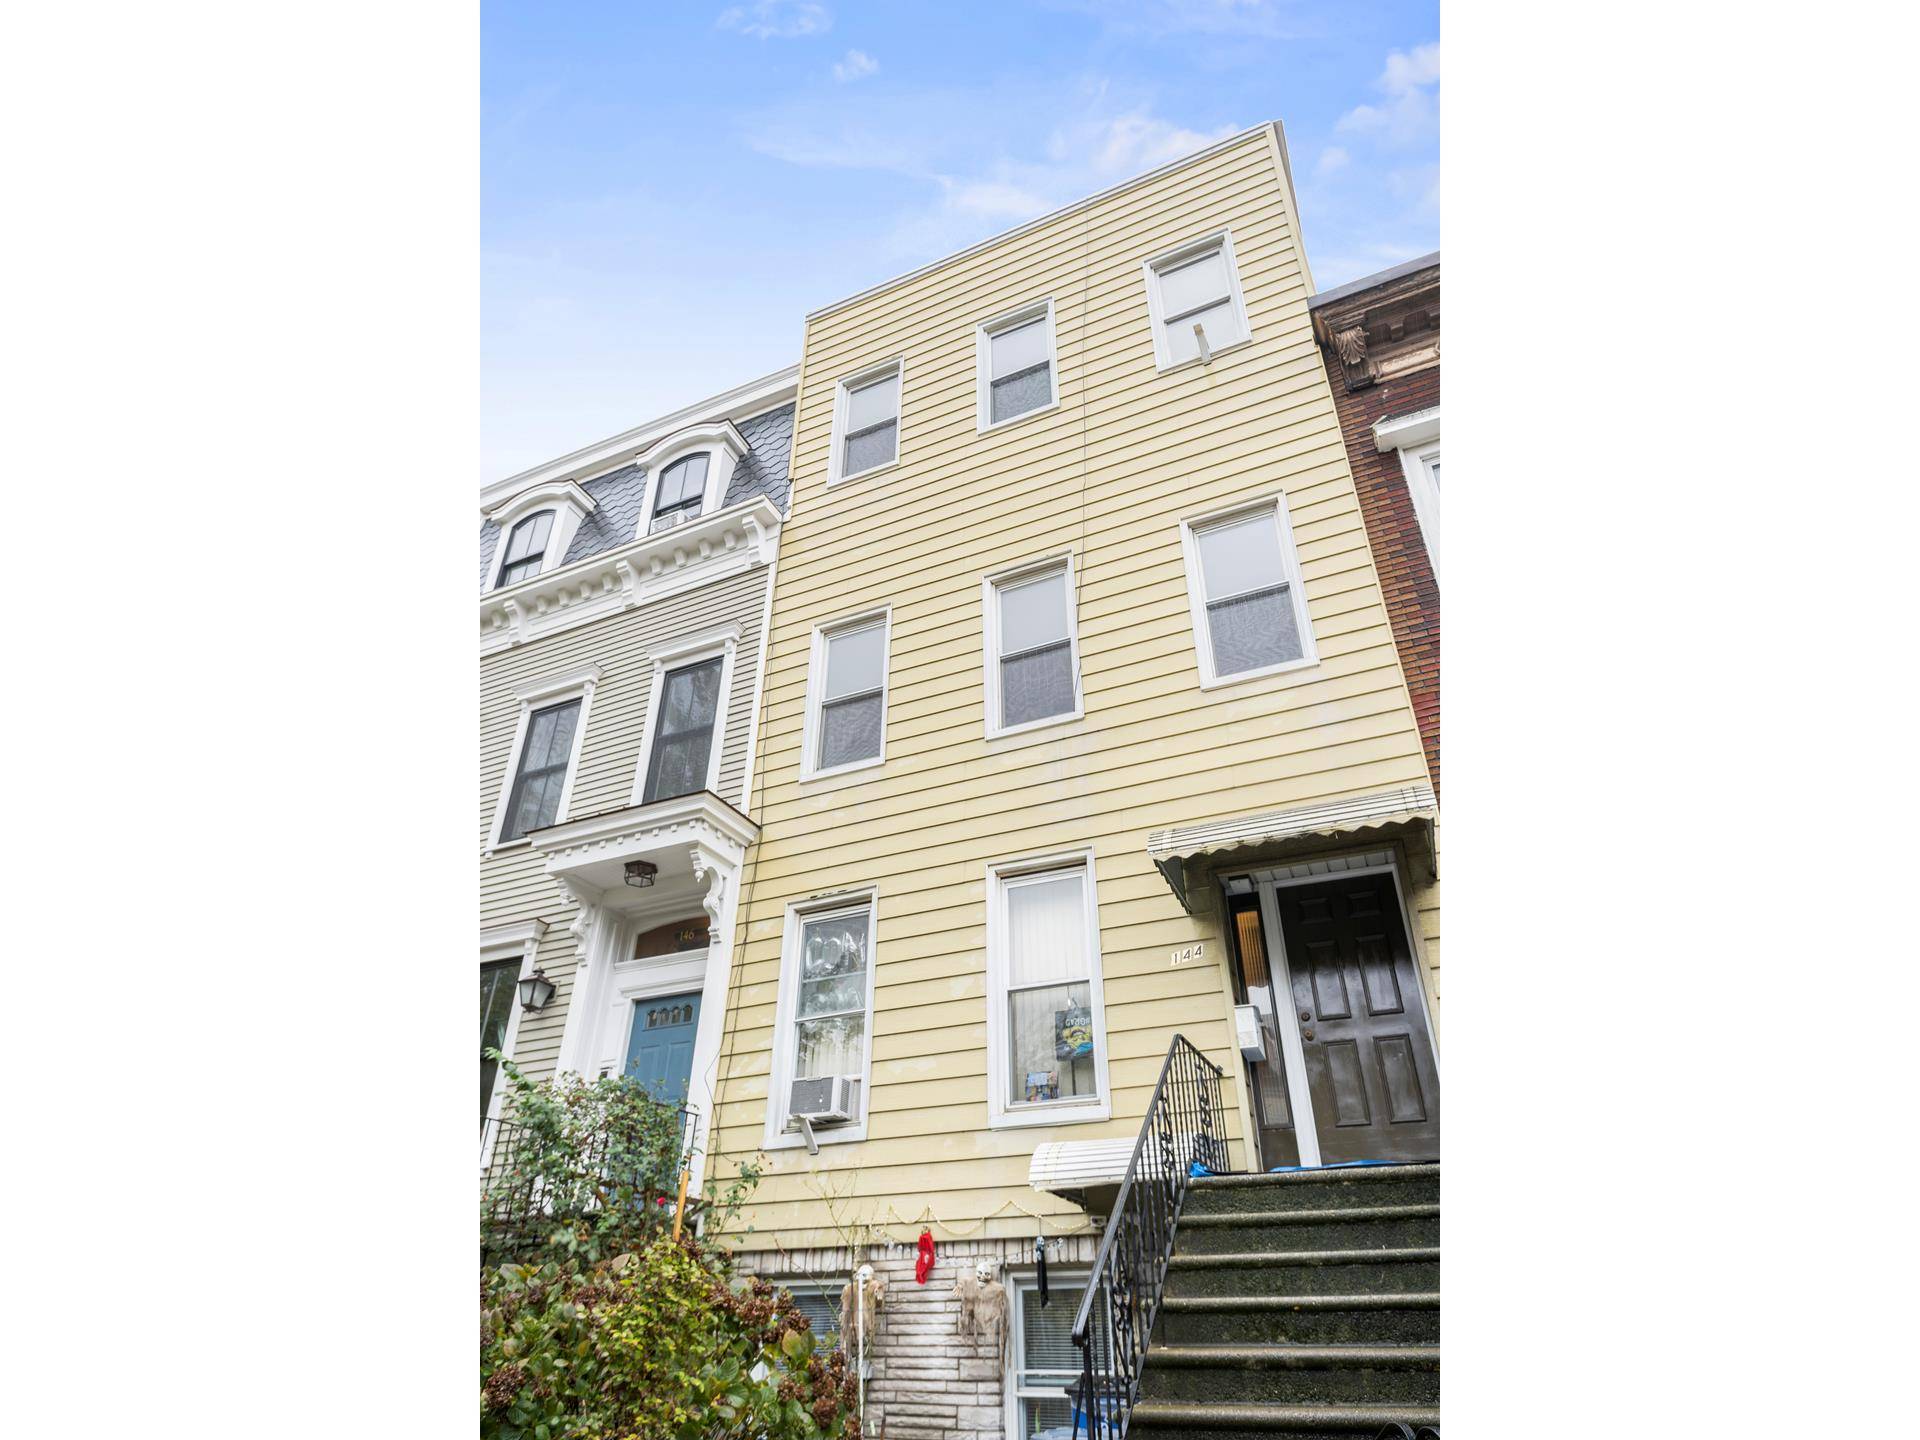 Back on the market ! Three family townhouse in the heart of Greenpoint, close to water and trendy Franklin Street.